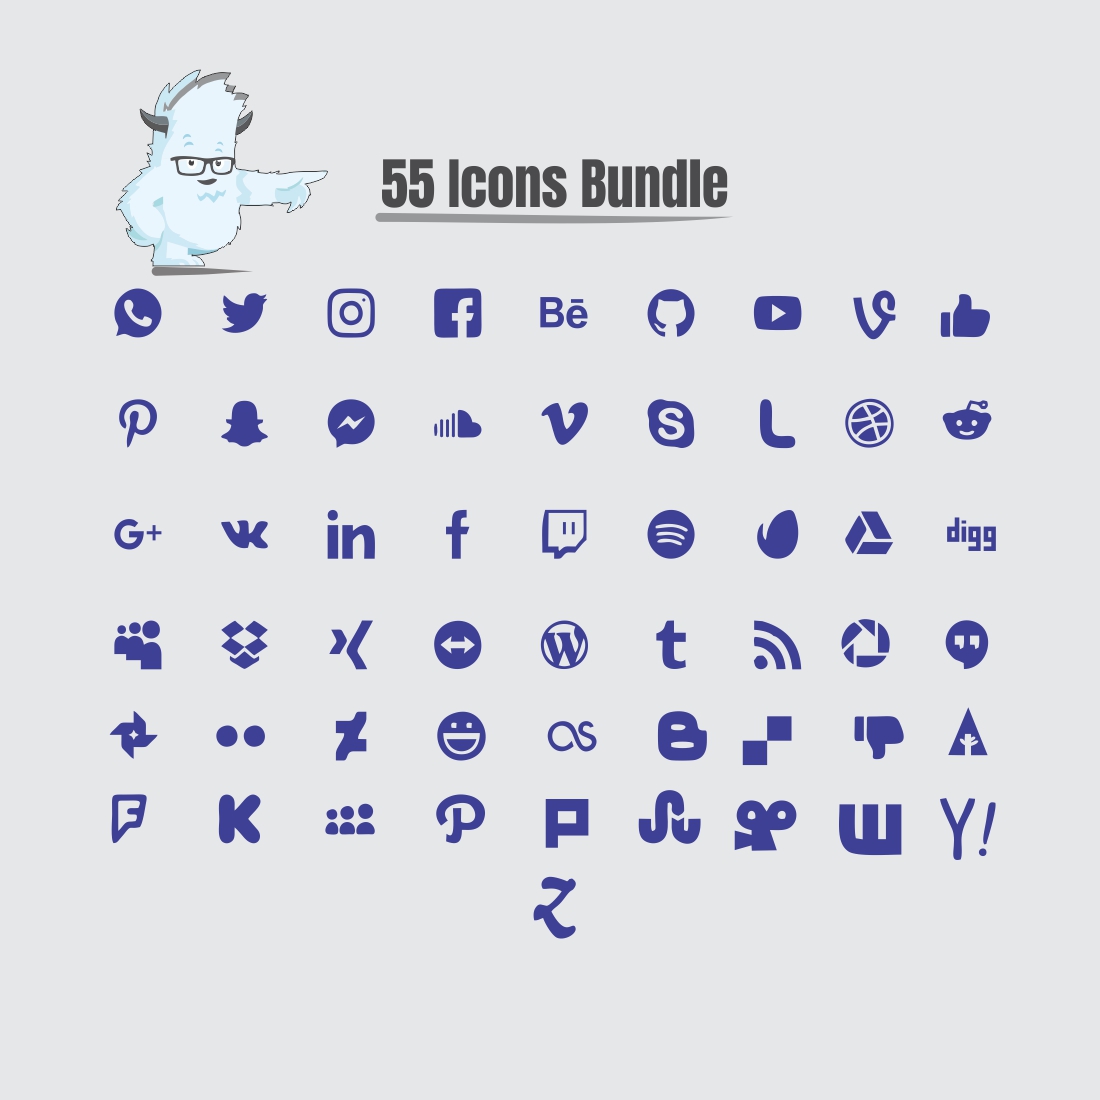 55 Icons Vector Design Bundle Pack cover image.